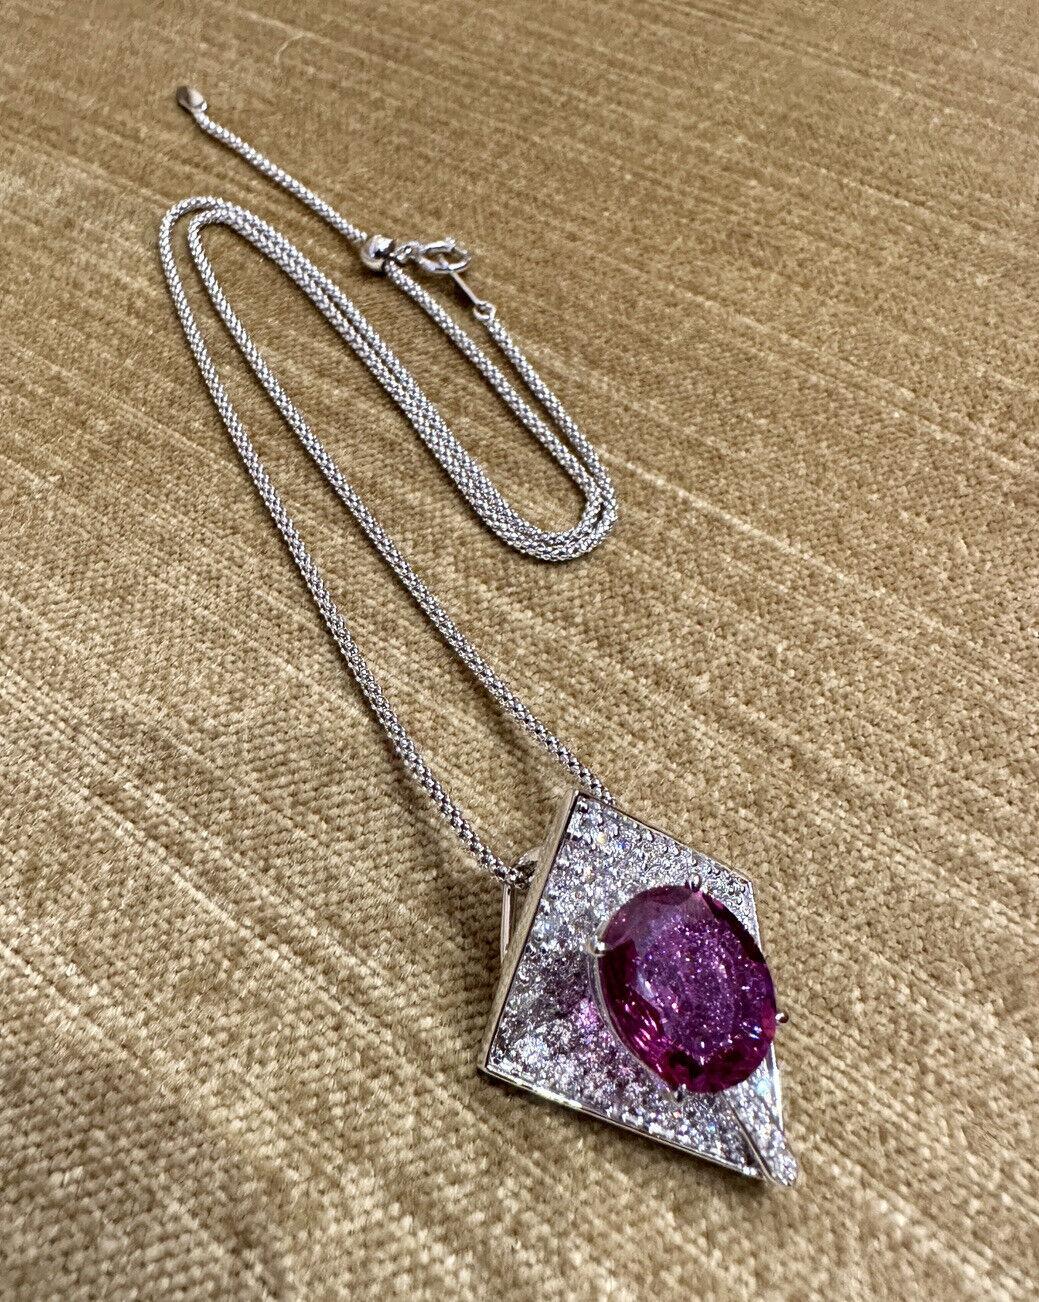 GRS Certified 5 carat Ruby Pendant Necklace with Diamonds in 18k White Gold In Excellent Condition For Sale In La Jolla, CA